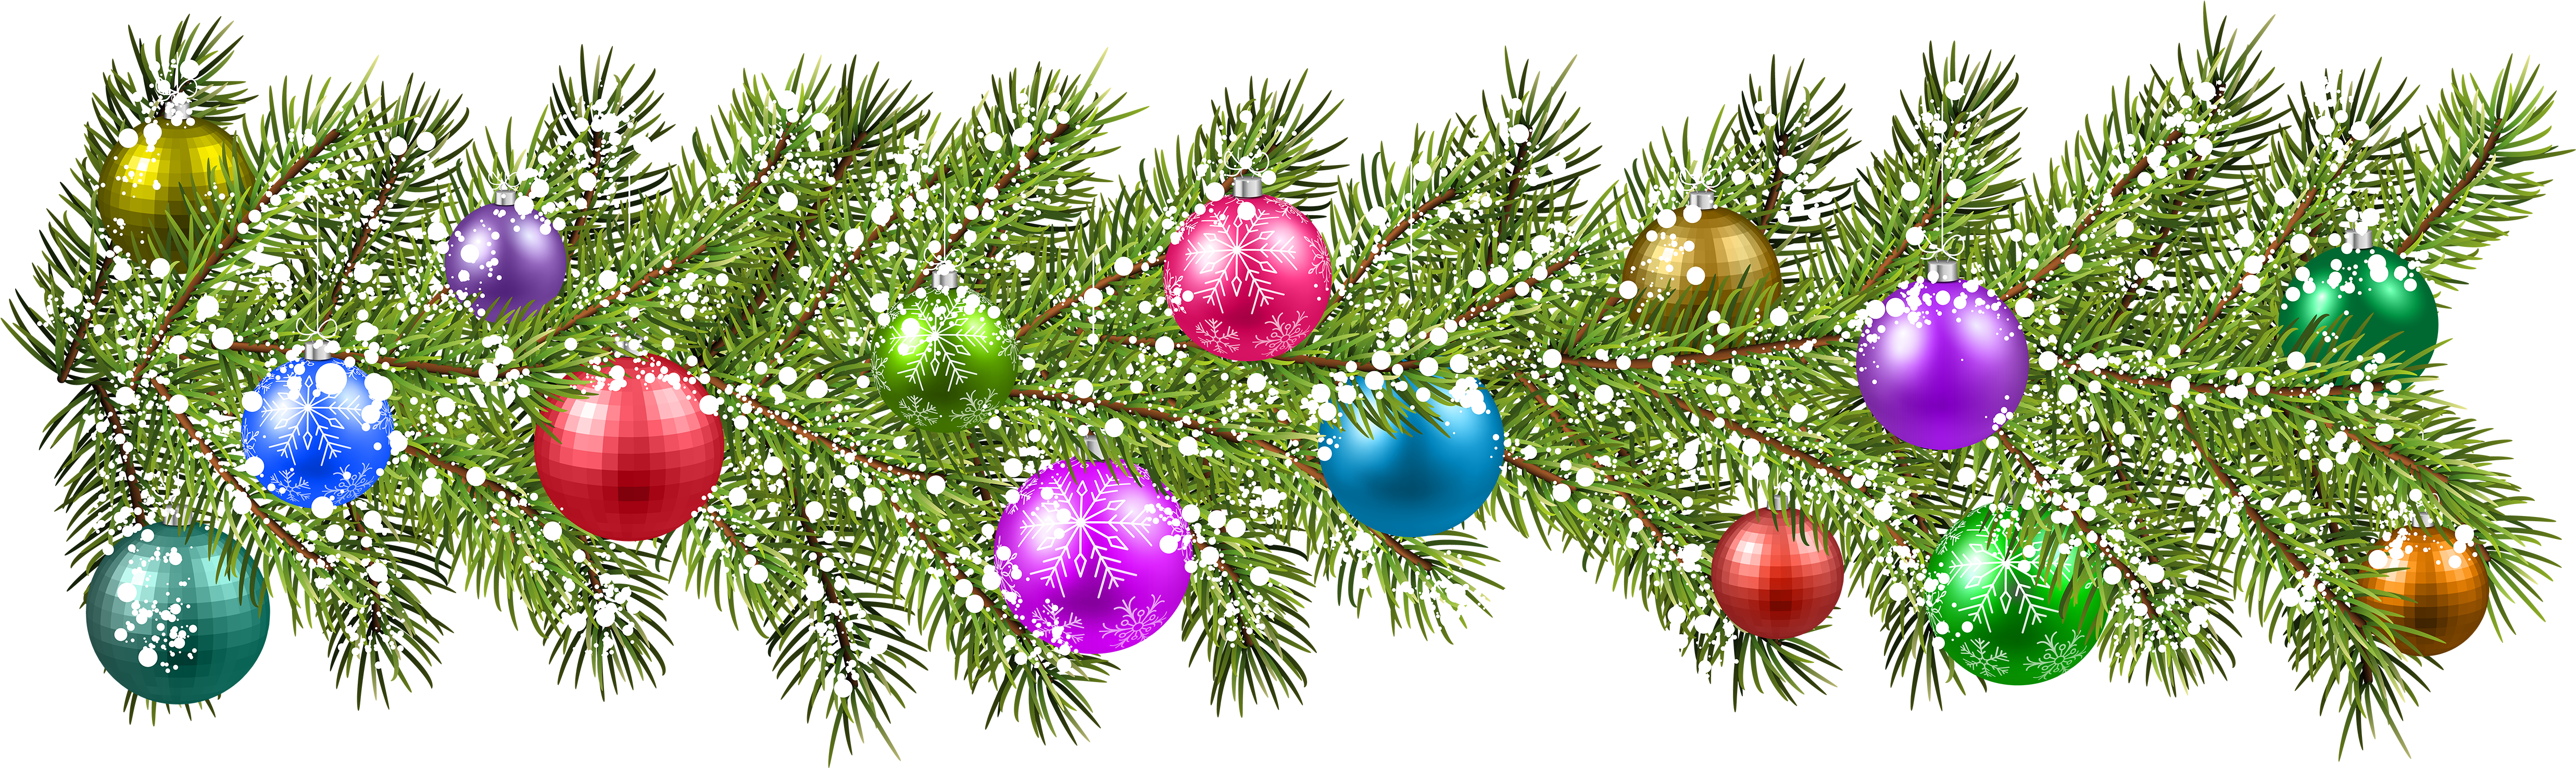 Photos Branches Christmas Download Free Image PNG Image